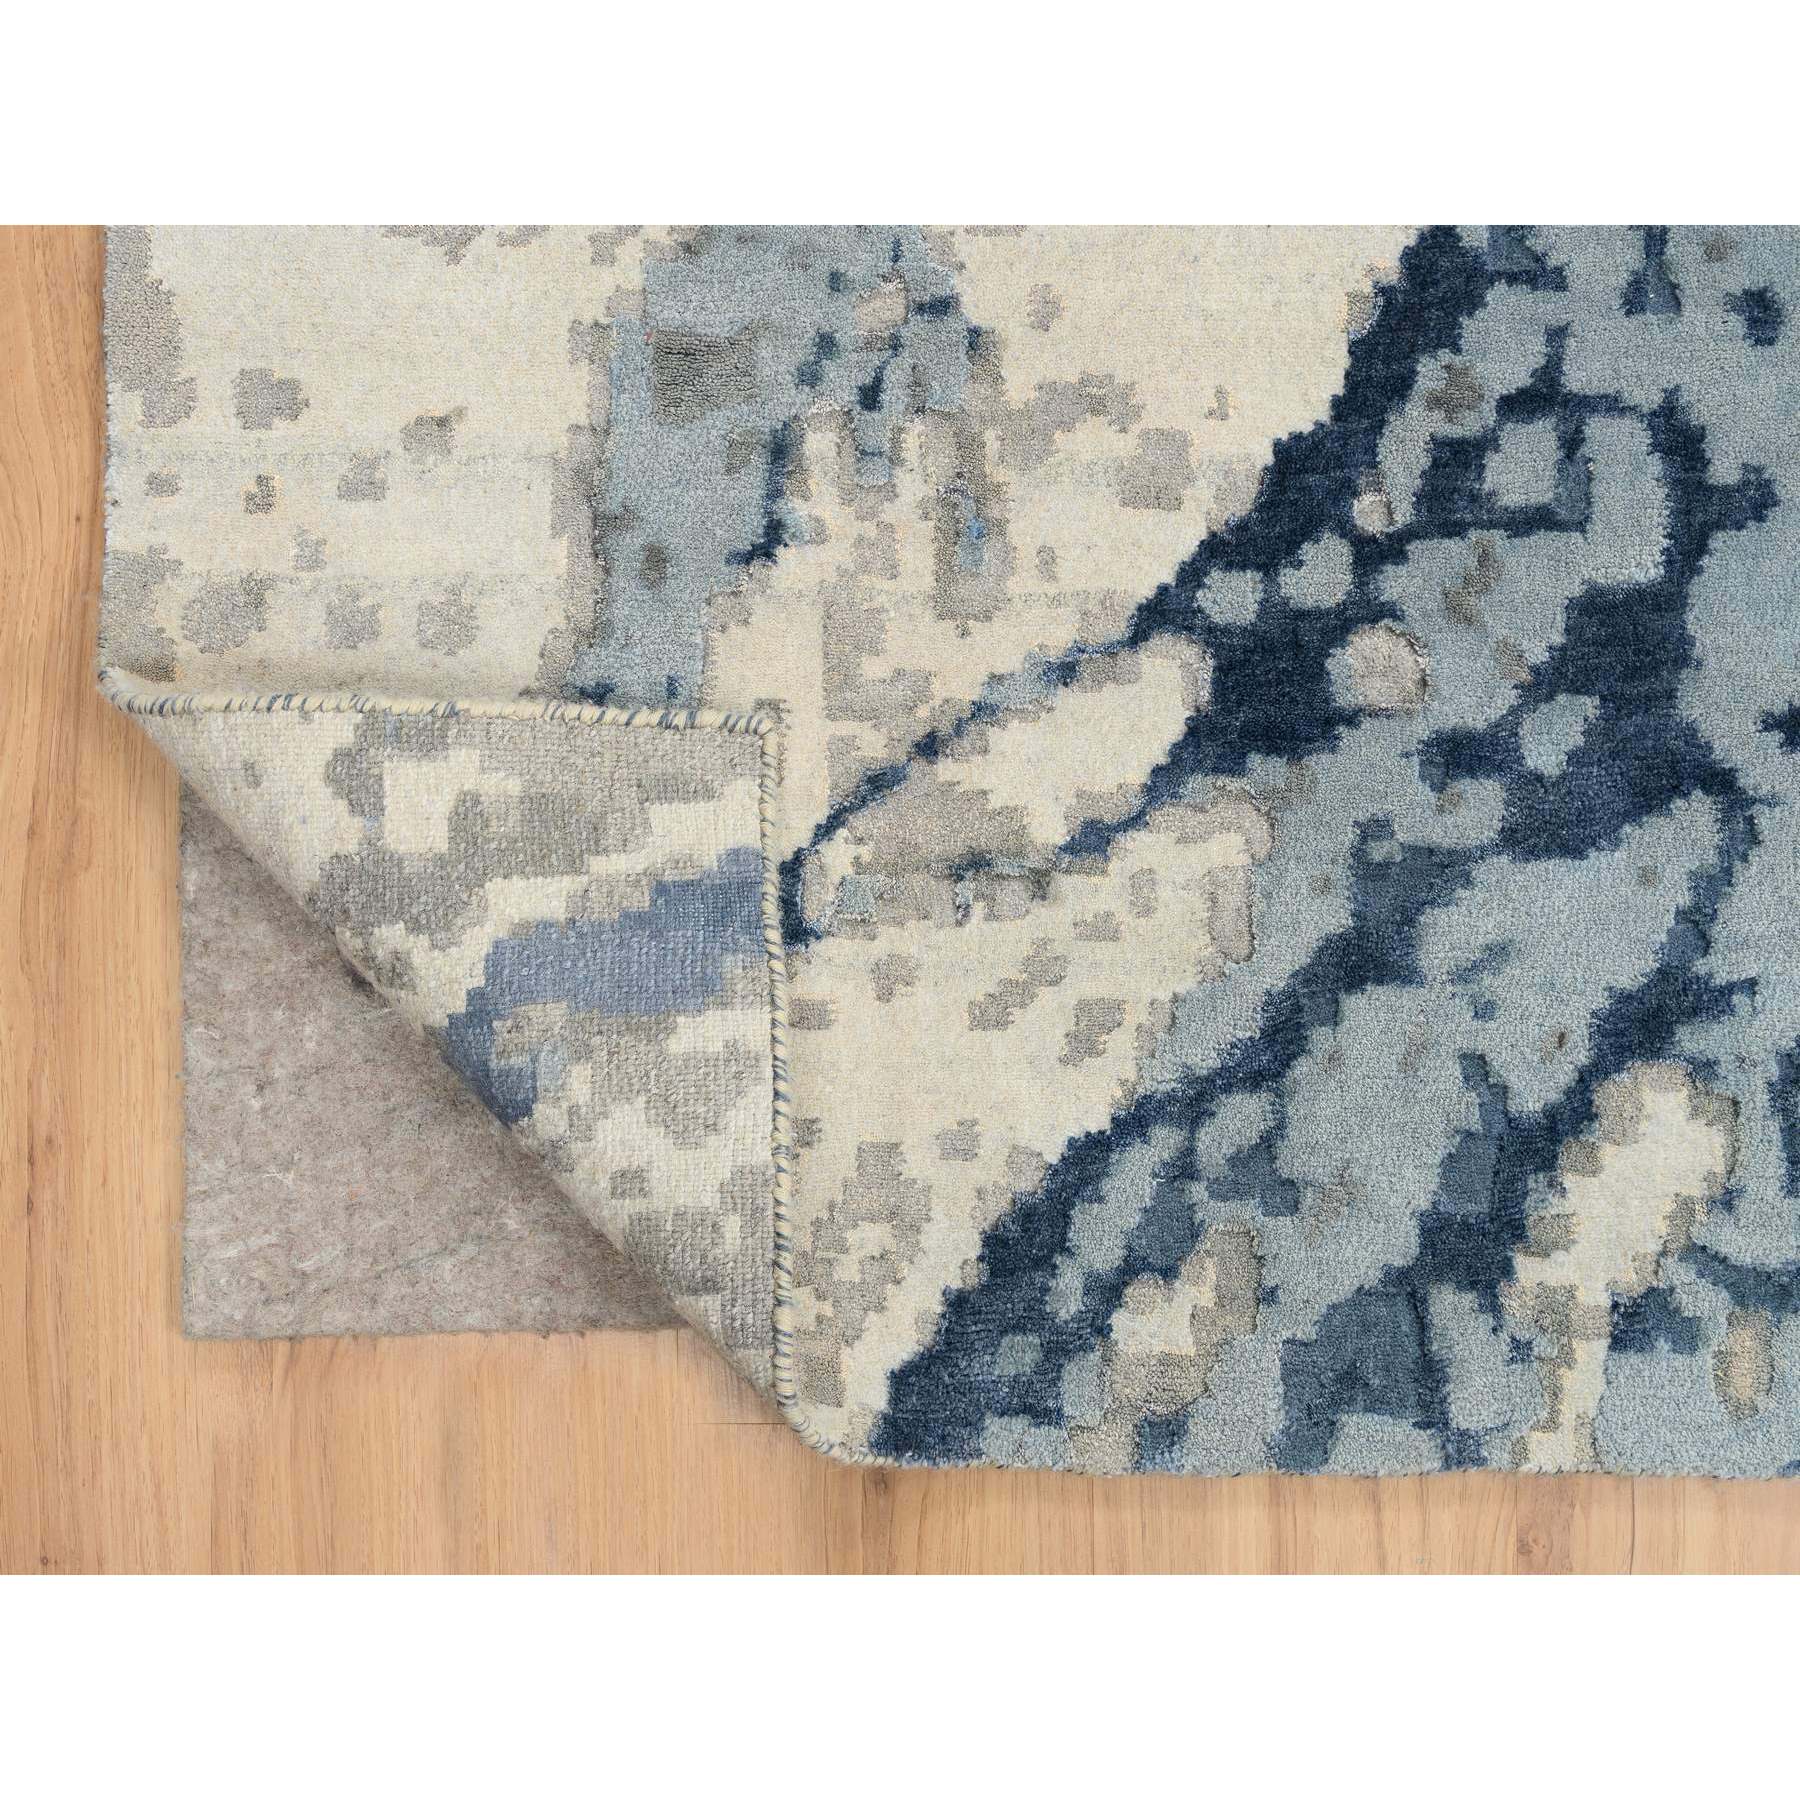 12'x17'9" Beige and Blue, Hand Woven Abstract Design, Hi-Low Pile Wool and Silk, Oversized Oriental Rug 